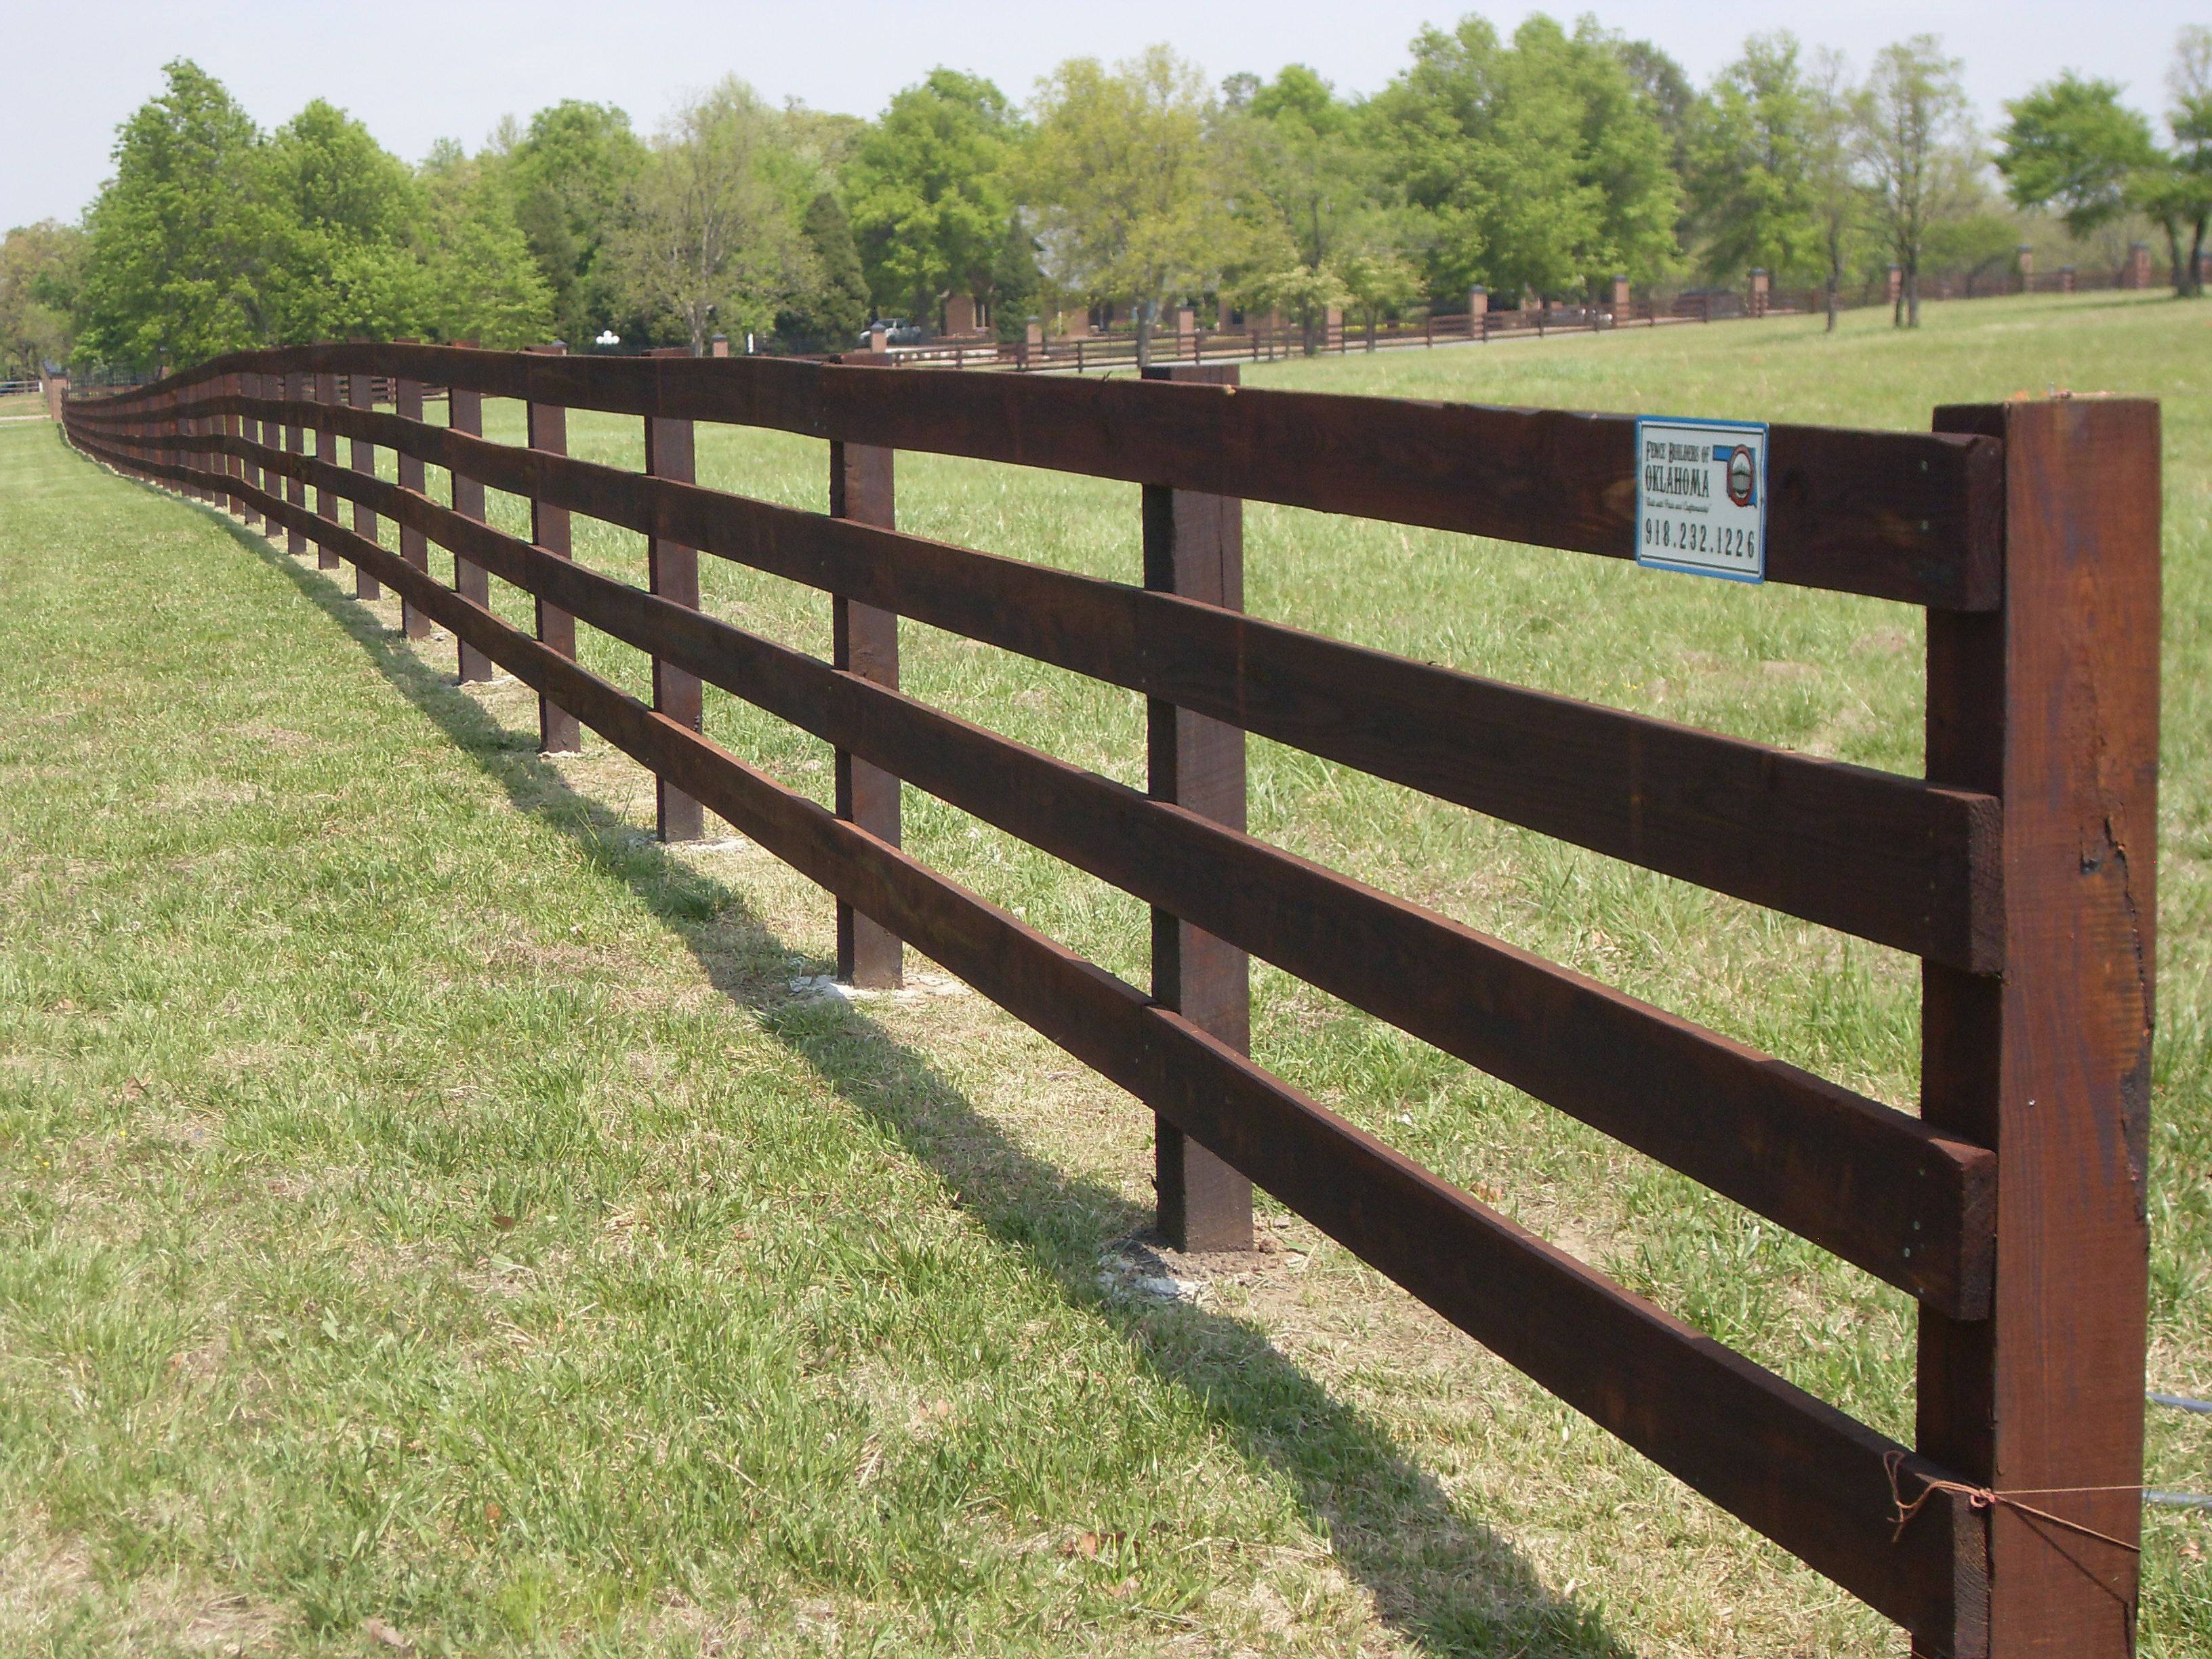 There is no denying that fences are an